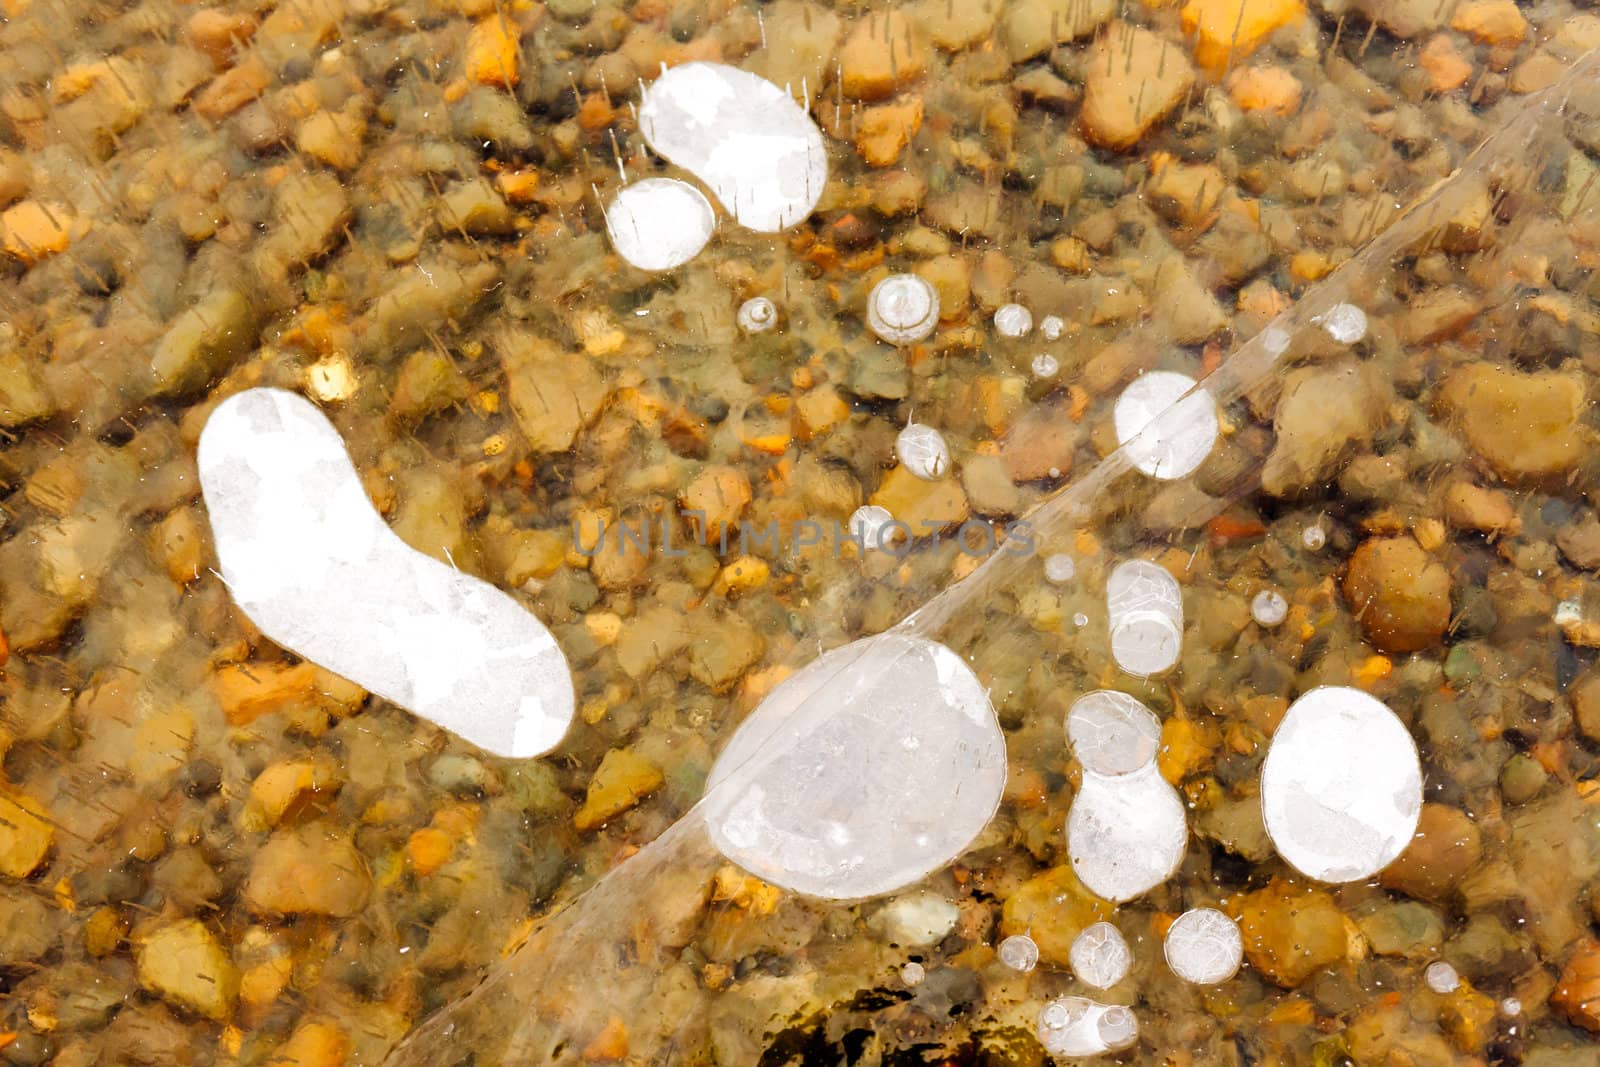 Air bubbles and cracks in thick layer of crystal clear ice over gravel bottom.